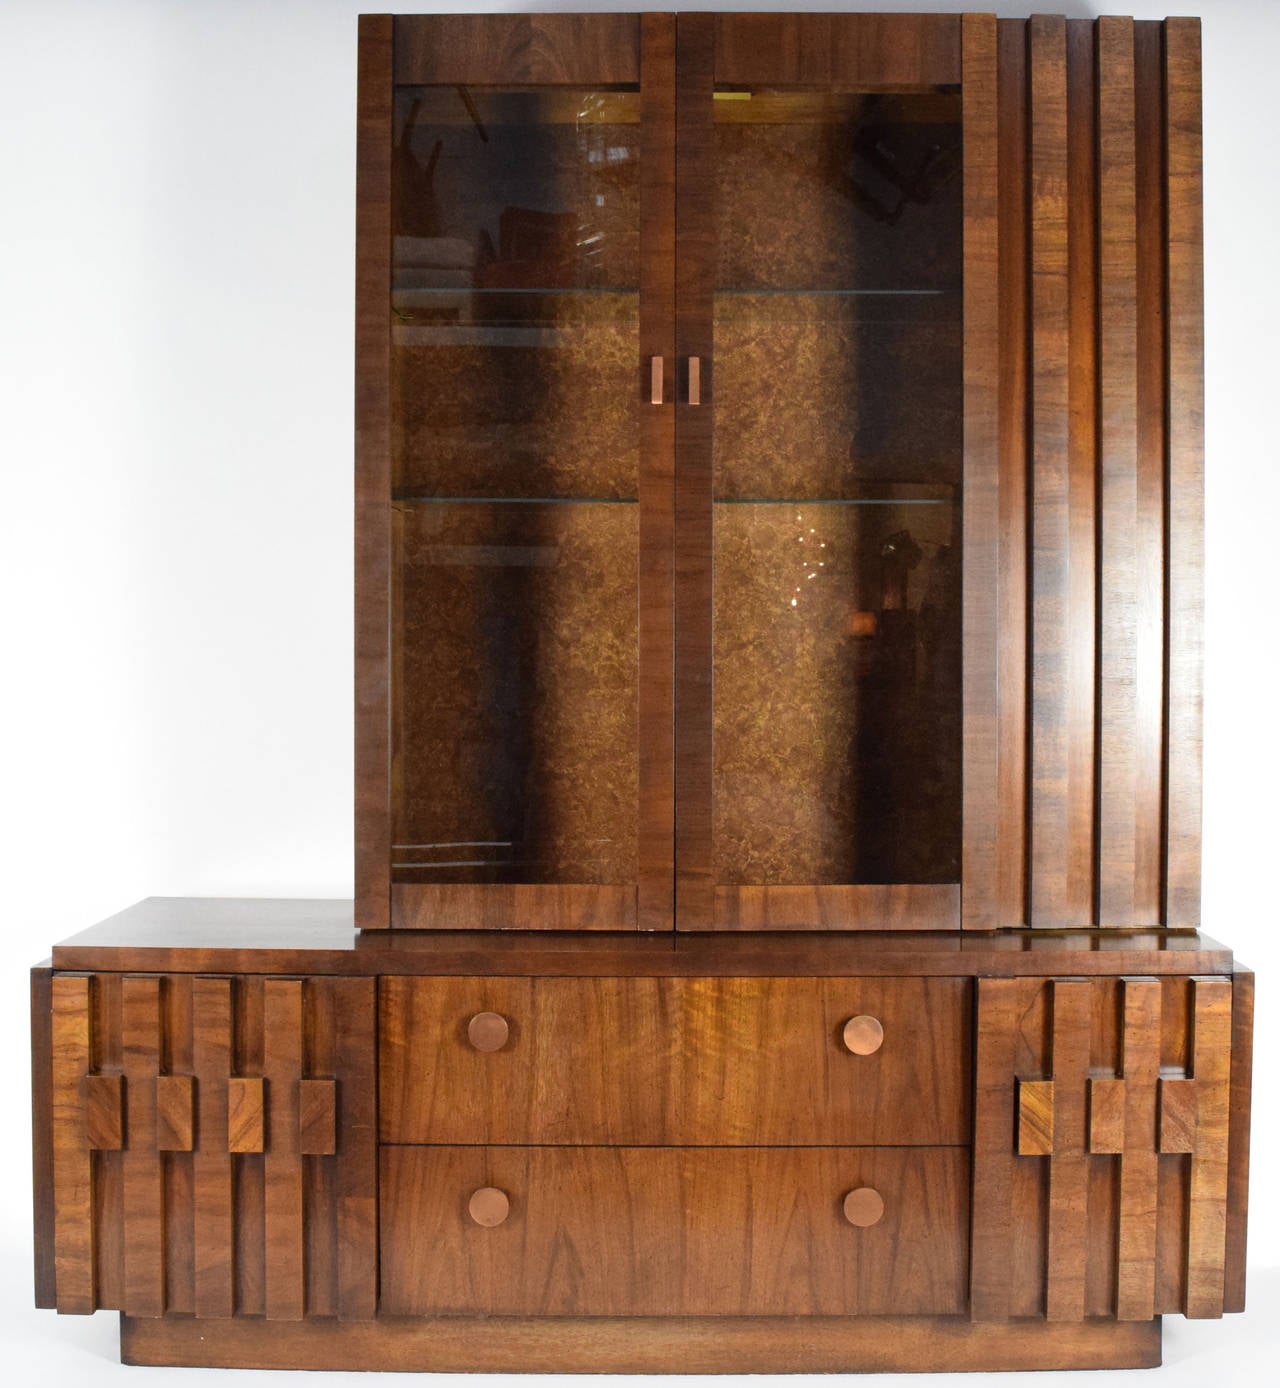 Beautiful Lane cabinet with hutch, part of their Mosaic series. Two glass display shelves in top and two drawers with two cabinets in bottom unit. Has interior lighting.